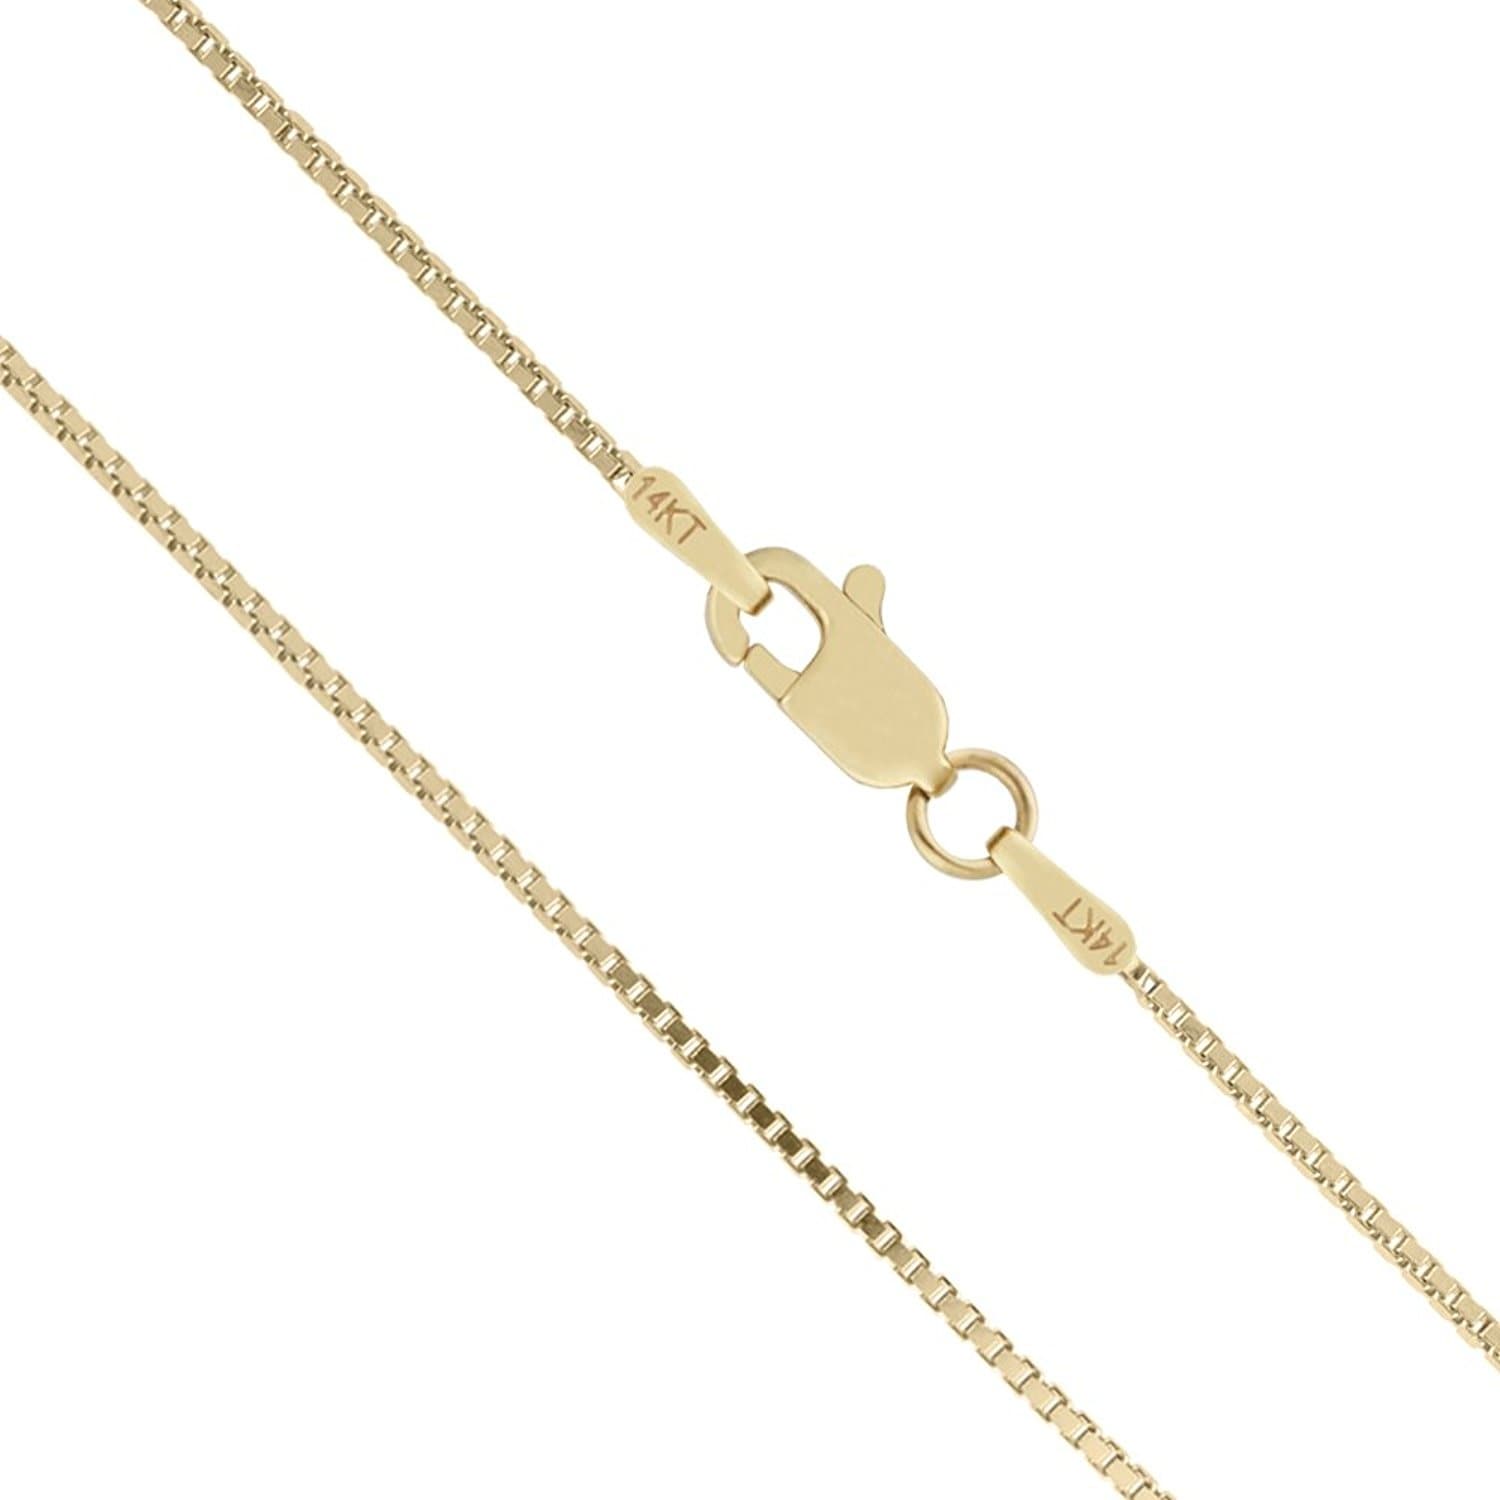 Gift box Details about   Men's 1mm 14K Yellow Gold Chain Singapore Chain Necklace 